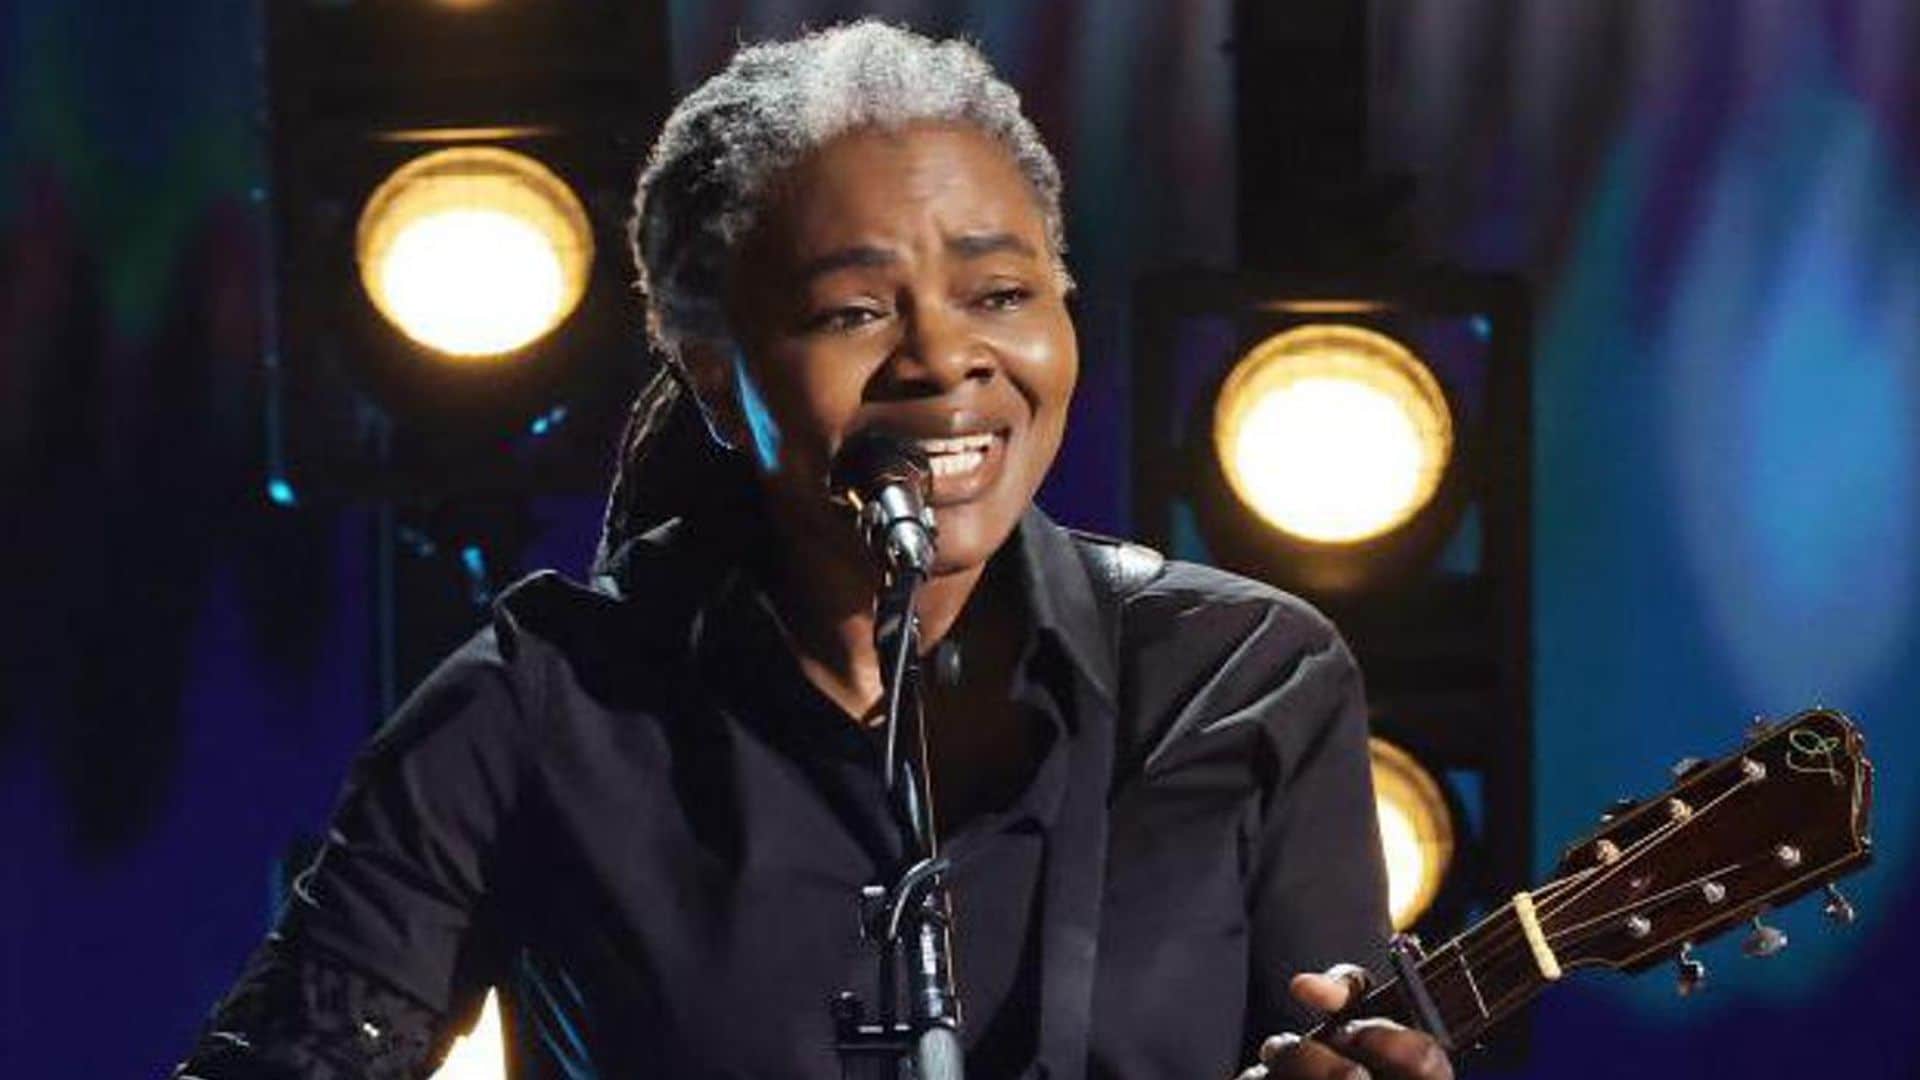 Tracy Chapman’s average daily stream on Spotify increases 370% after GRAMMY performance